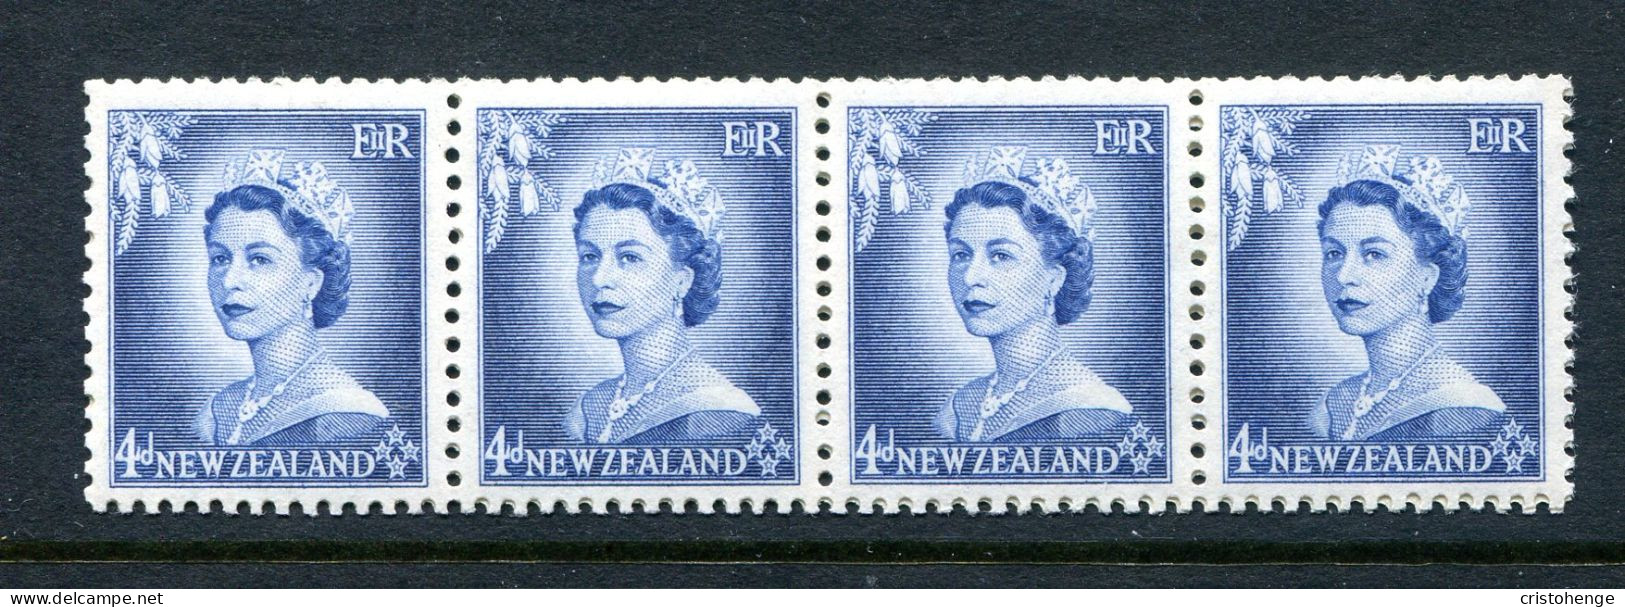 New Zealand 1953-59 QEII Definitives - Coil Strip - 4d Blue - Strip Of 8 MNH (SG Unlisted) - Unused Stamps